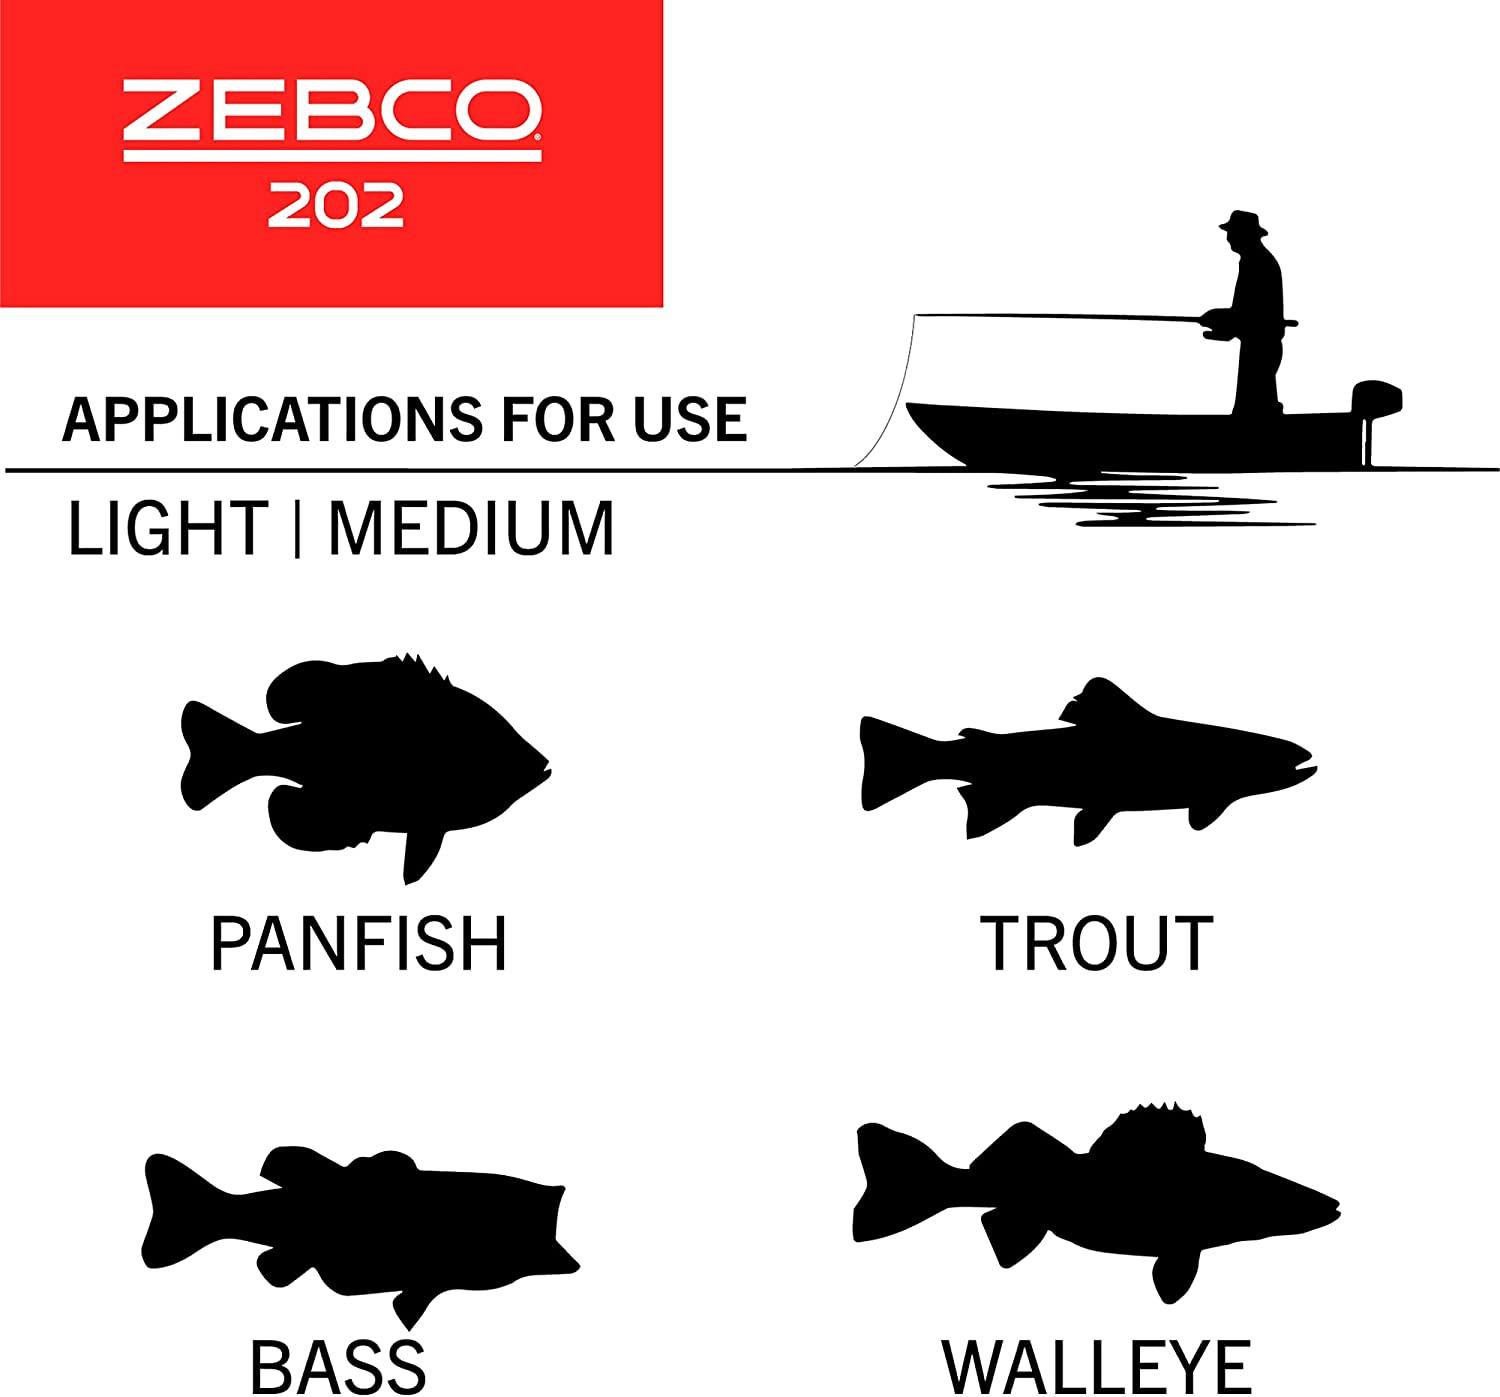 Zebco 202 Spincast Reel and Fishing Rod Combo 5-Foot 6-Inch 2-Piece Fishing  Pole Size 30 Reel Right-Hand Retrieve Pre-Spooled with 10-Pound Zebco Line  BlackRed - With 27pc Tackle